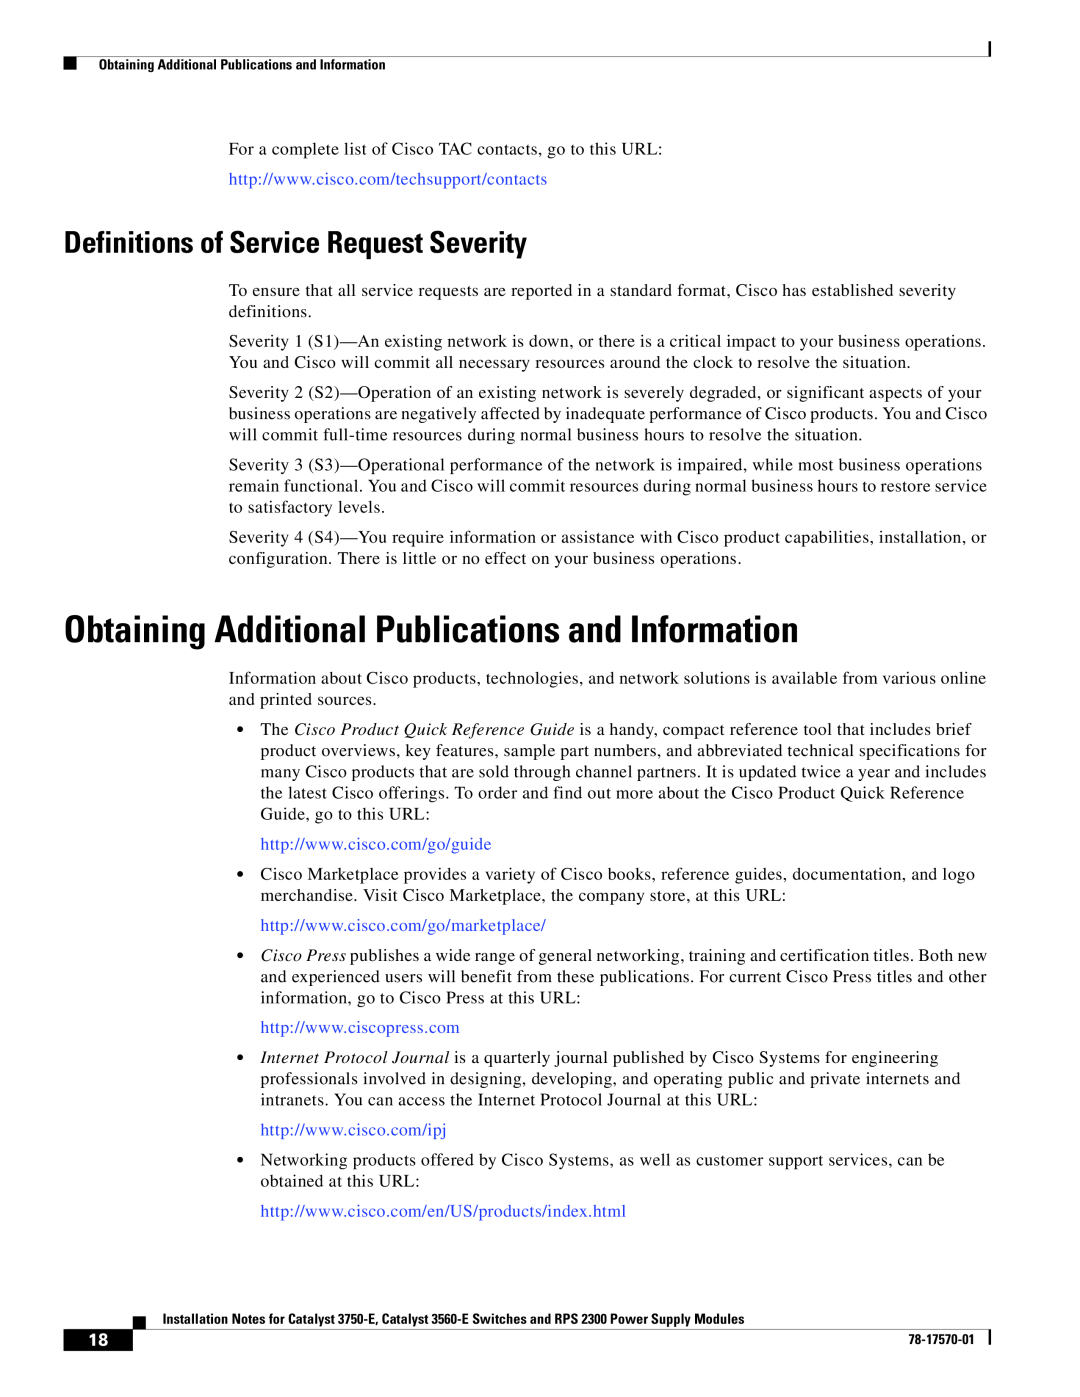 Cisco Systems RPS 2300, 3560-E Obtaining Additional Publications and Information, Definitions of Service Request Severity 